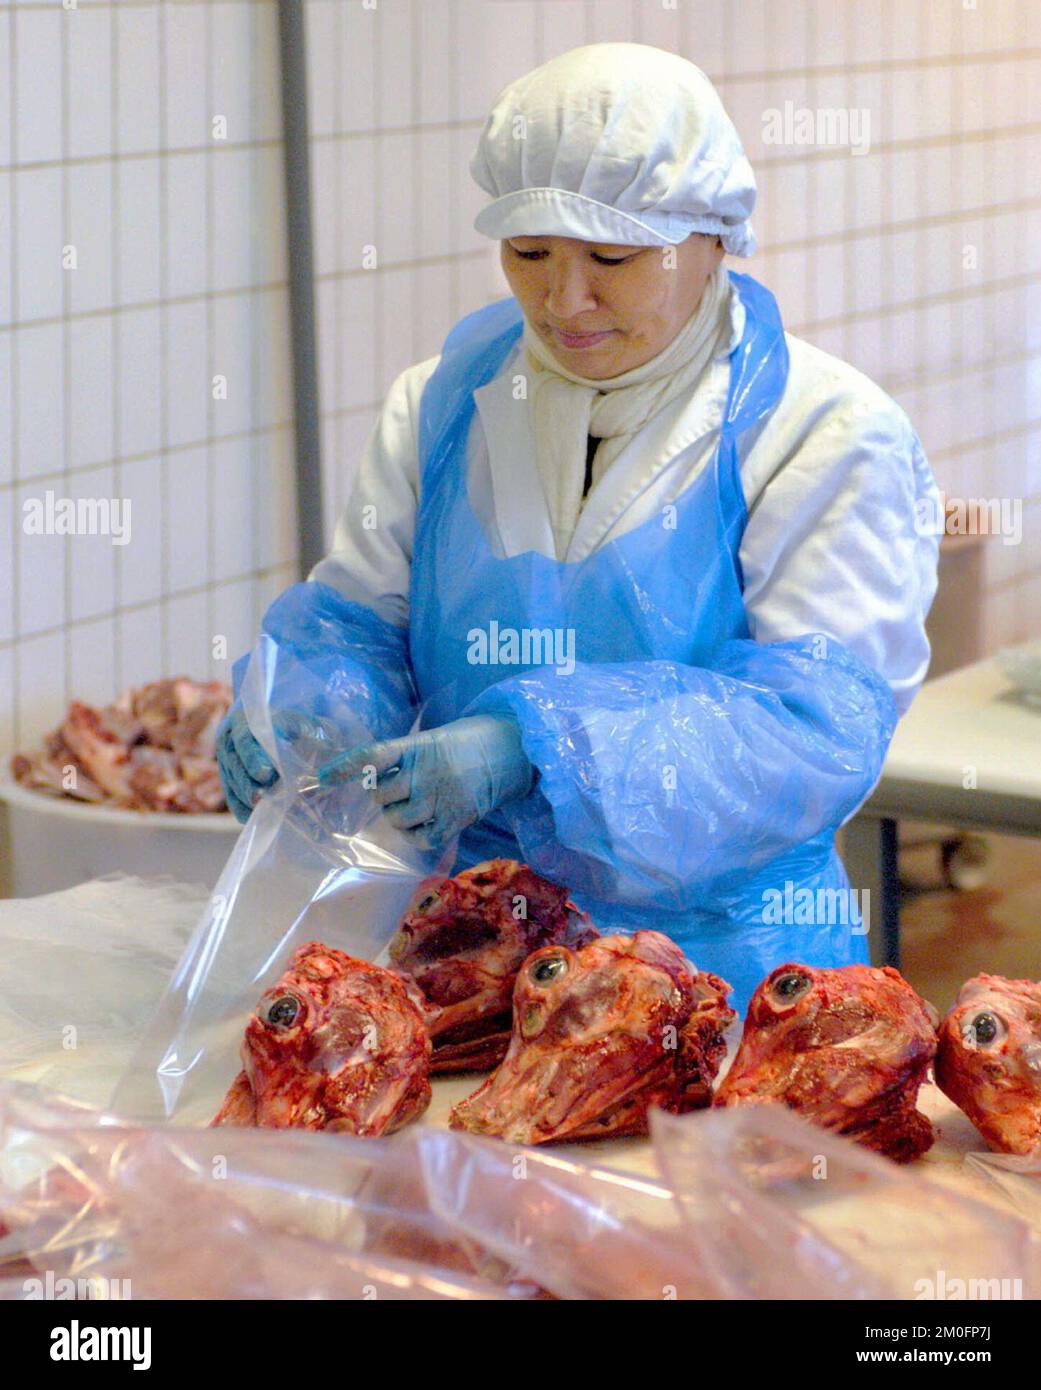 The annual sheep slaughtering at Neqi A/S on Greenland. A woman working at Neqi is preparing sheep heads for sale. The heads are being used to make 'smalahove', a delicacy in Greenland and Norway. The entire head is supposed to be eaten including the eye. Stock Photo